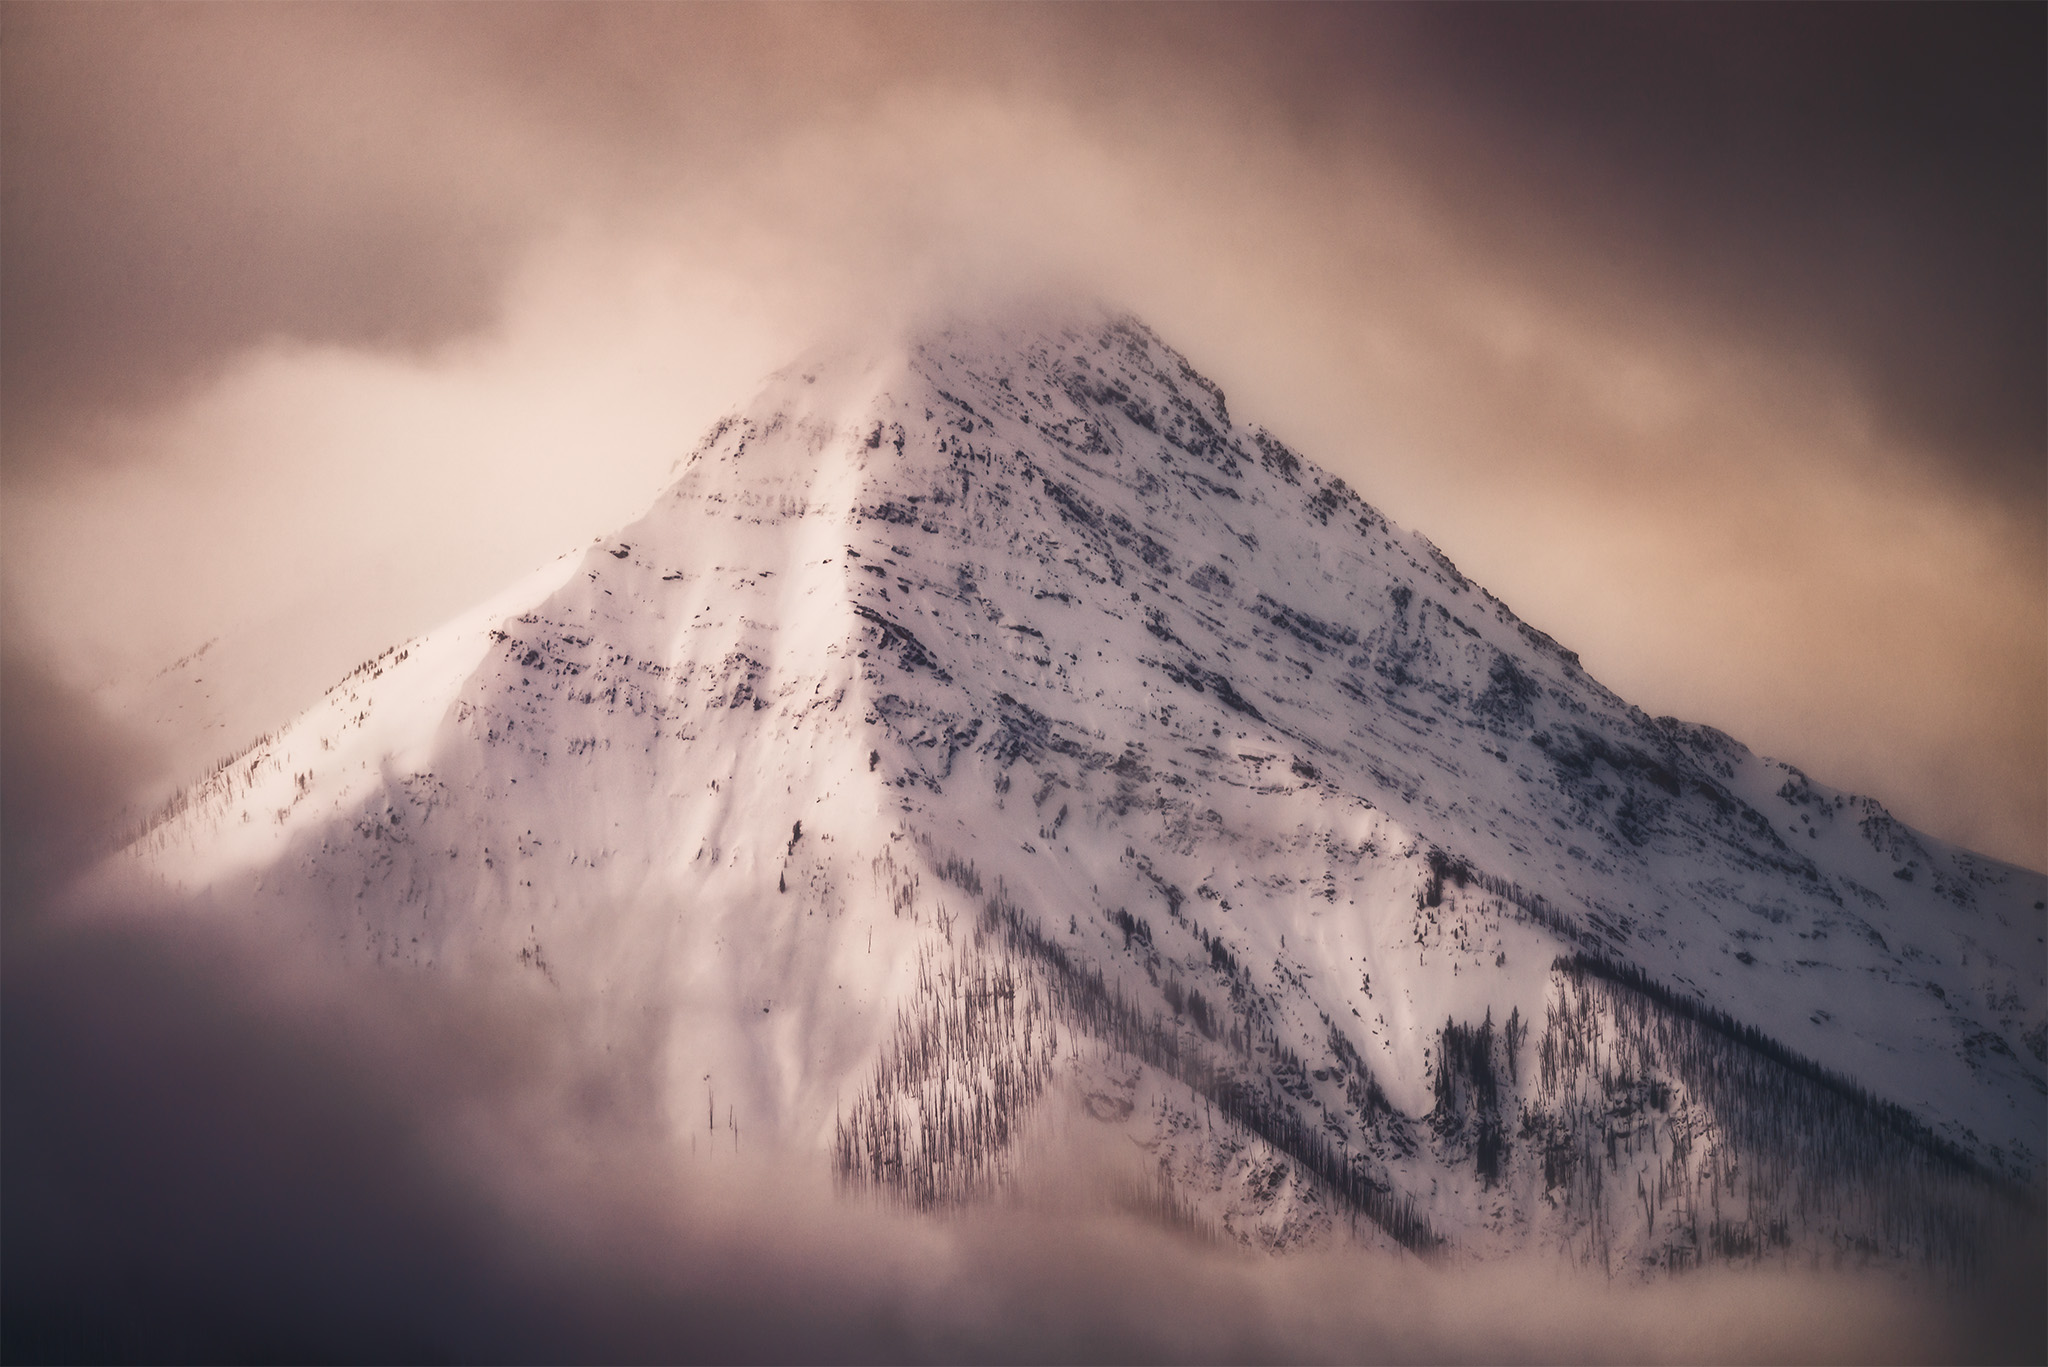 An intimate landscape of Vermilion Peak in Kootenay National Park shrouded by light and cloud in the winter